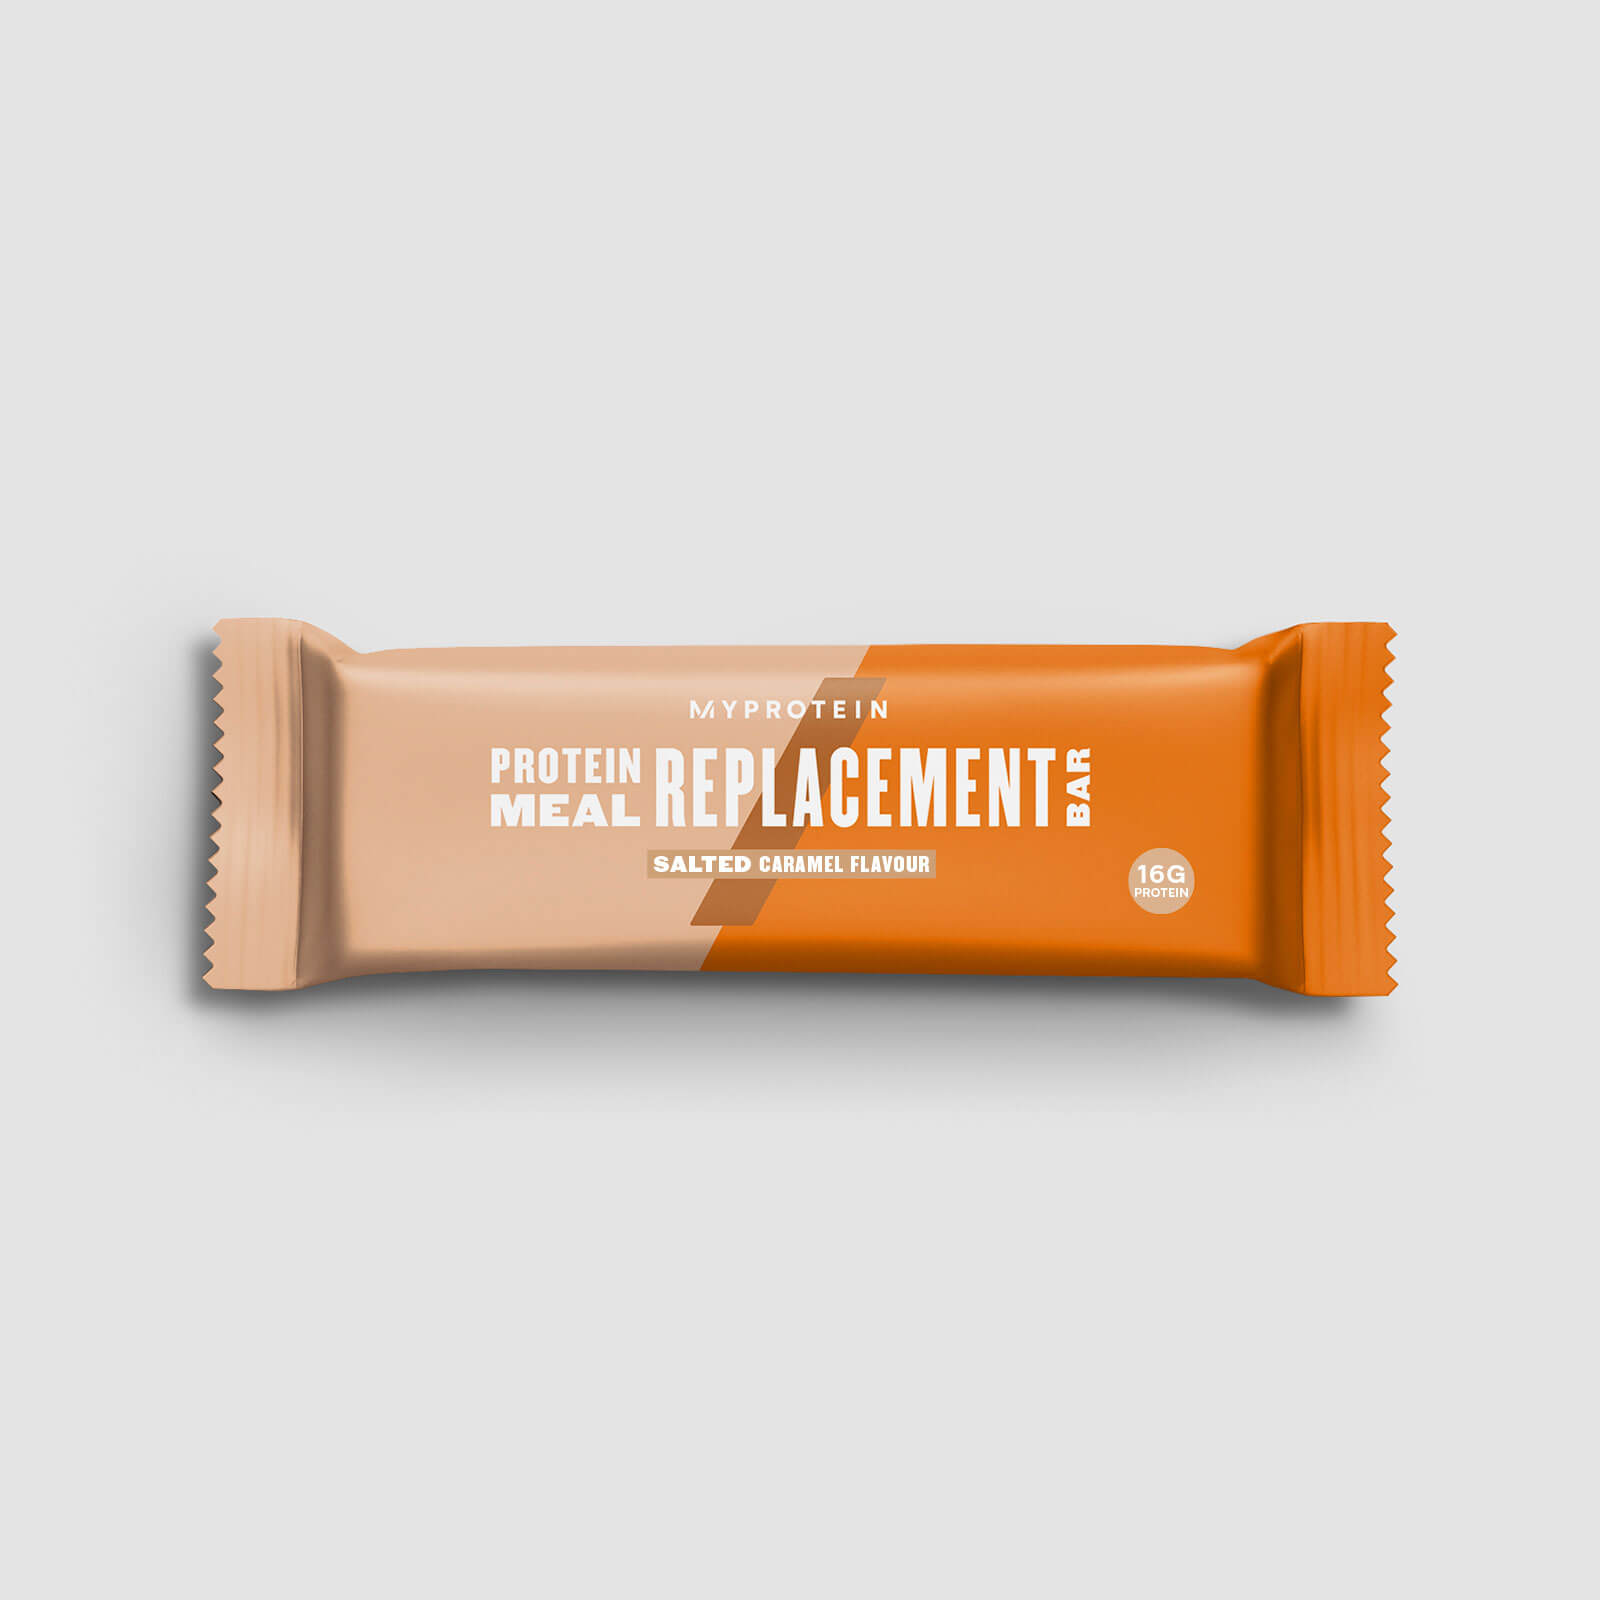 Myprotein Meal Replacement Bar (Sample) - 60g - Salted Caramel